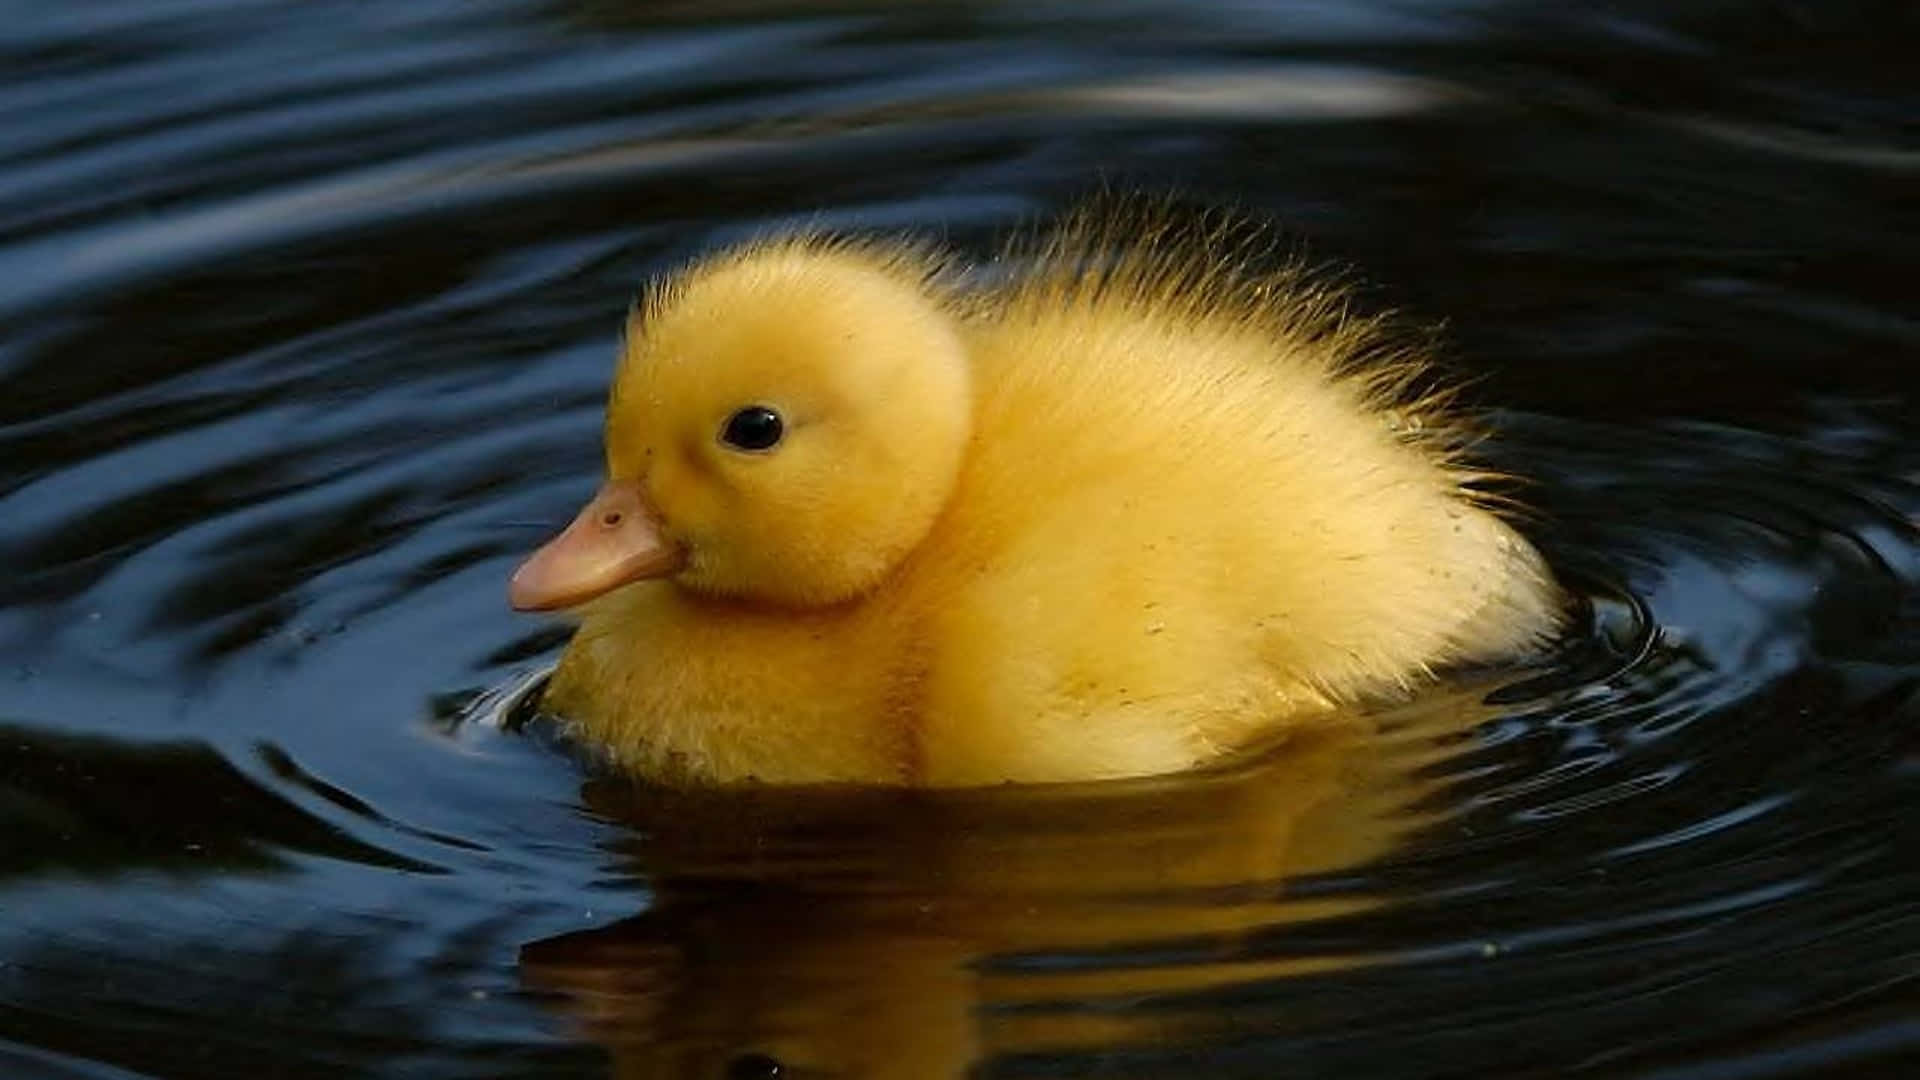 Look at this sweet, fluffy little duckling! Wallpaper